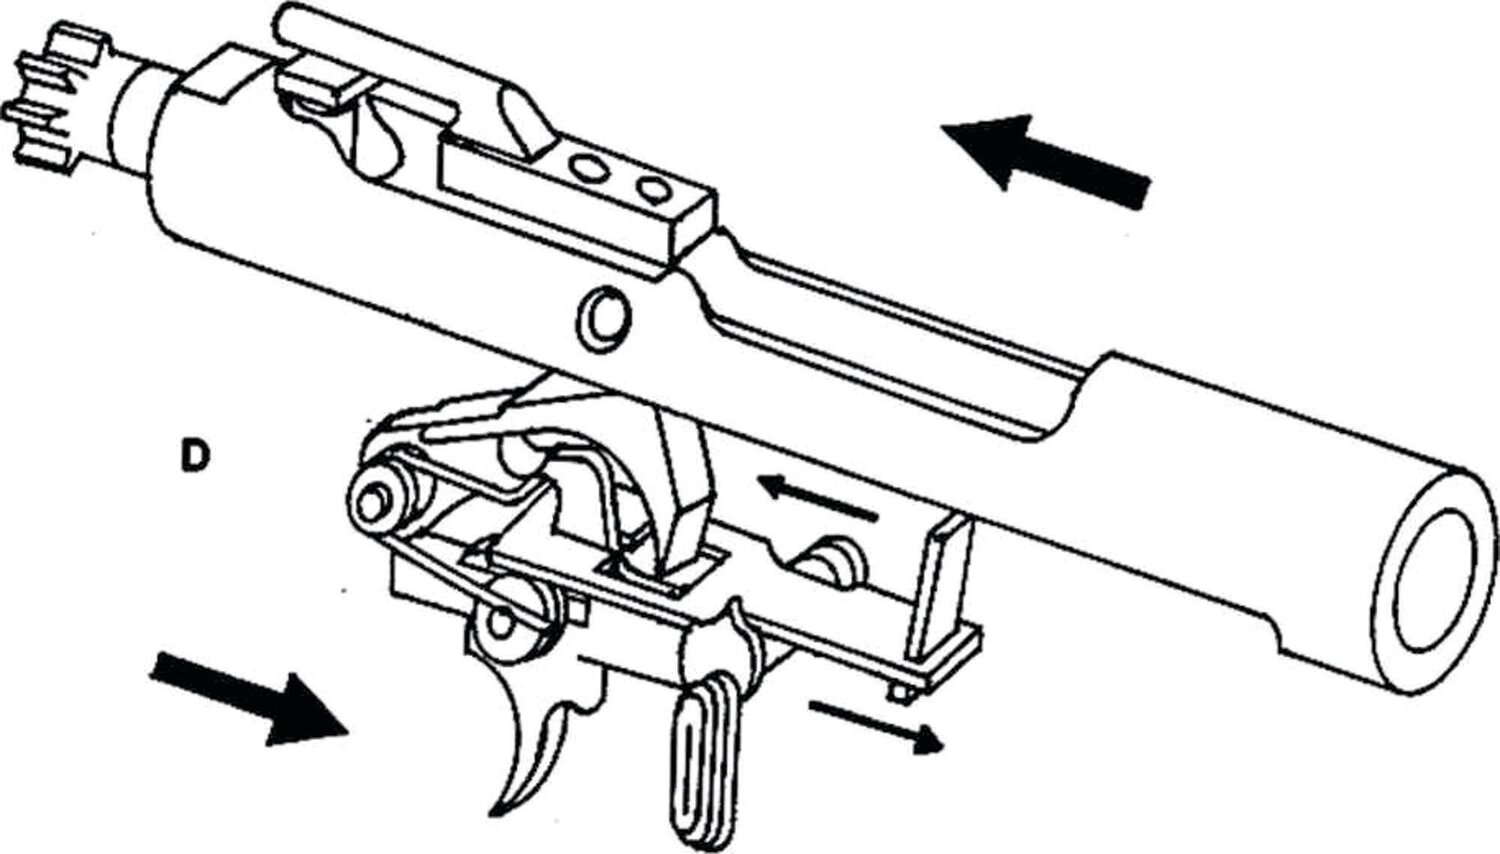 From https://www.bevfitchett.us/ar15-to-m16-conversion/lightning-link.html: "The Way It Works ... In normal semi-auto operation the hammer is cocked by a rearward movement of the bolt carrier, as the carrier moves forward, the hammer is caught and held in the cocked position by the sear located on the forward part of the trigger catching in the sear notch, on the hammer. If you hold the trigger after a shot's fired the sear will not catch in the hammer's sear notch when the hammer cocks because the sear is depressed below the arc of the hammer notch.